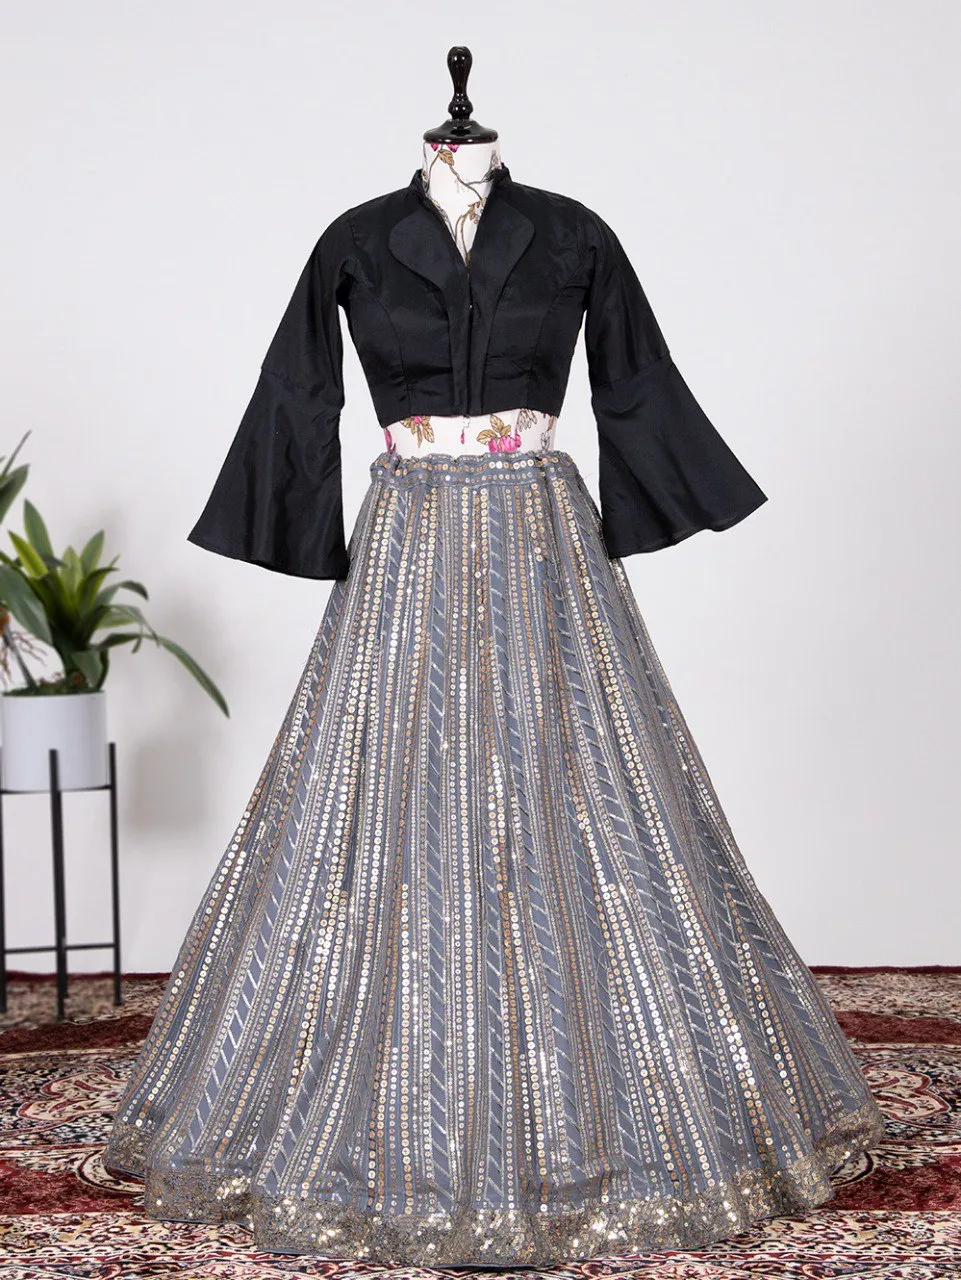 Lycra Party Wear Lehenga in Black and Grey with Stone work | Indian gowns  dresses, Party wear lehenga, Indian fashion dresses